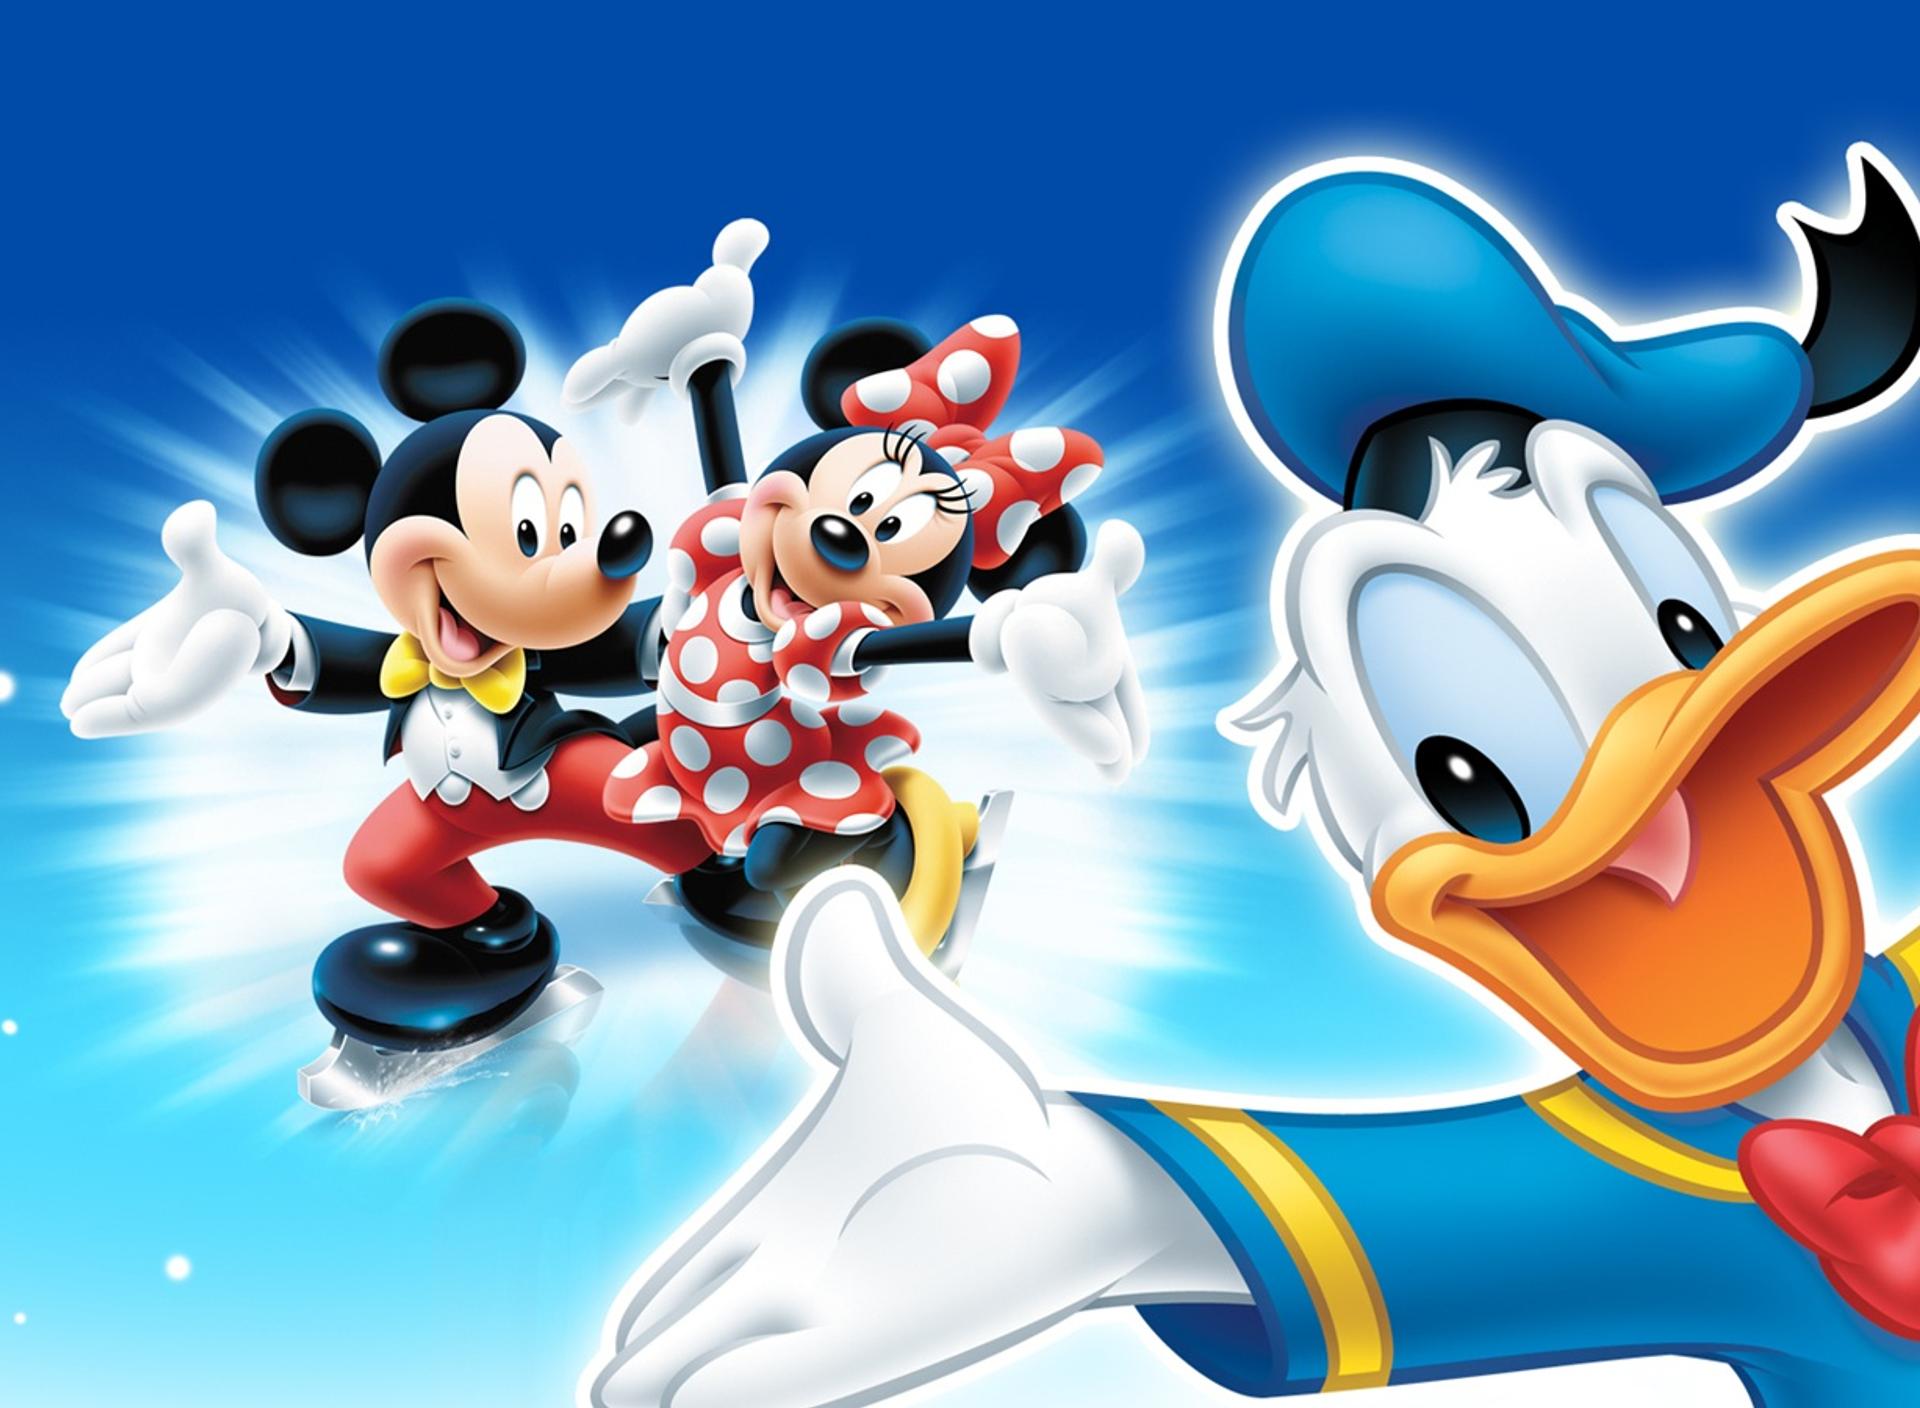 Download Donald Duck and Mickey with Minnie Mouse 1280x800 Tablet.